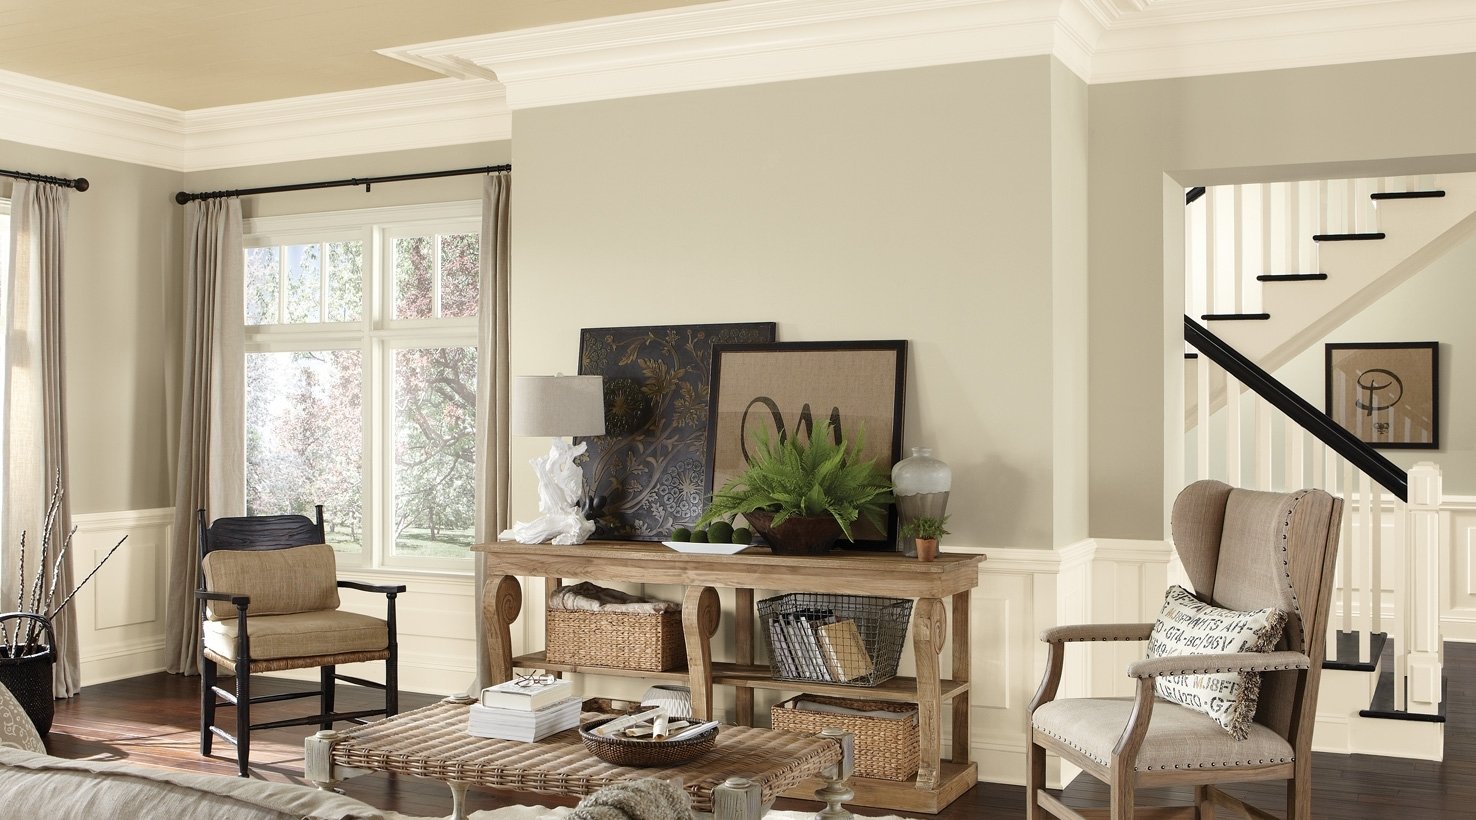 10 Unique Paint For Living Room Ideas living room paint color ideas inspiration gallery sherwin williams 28 2022